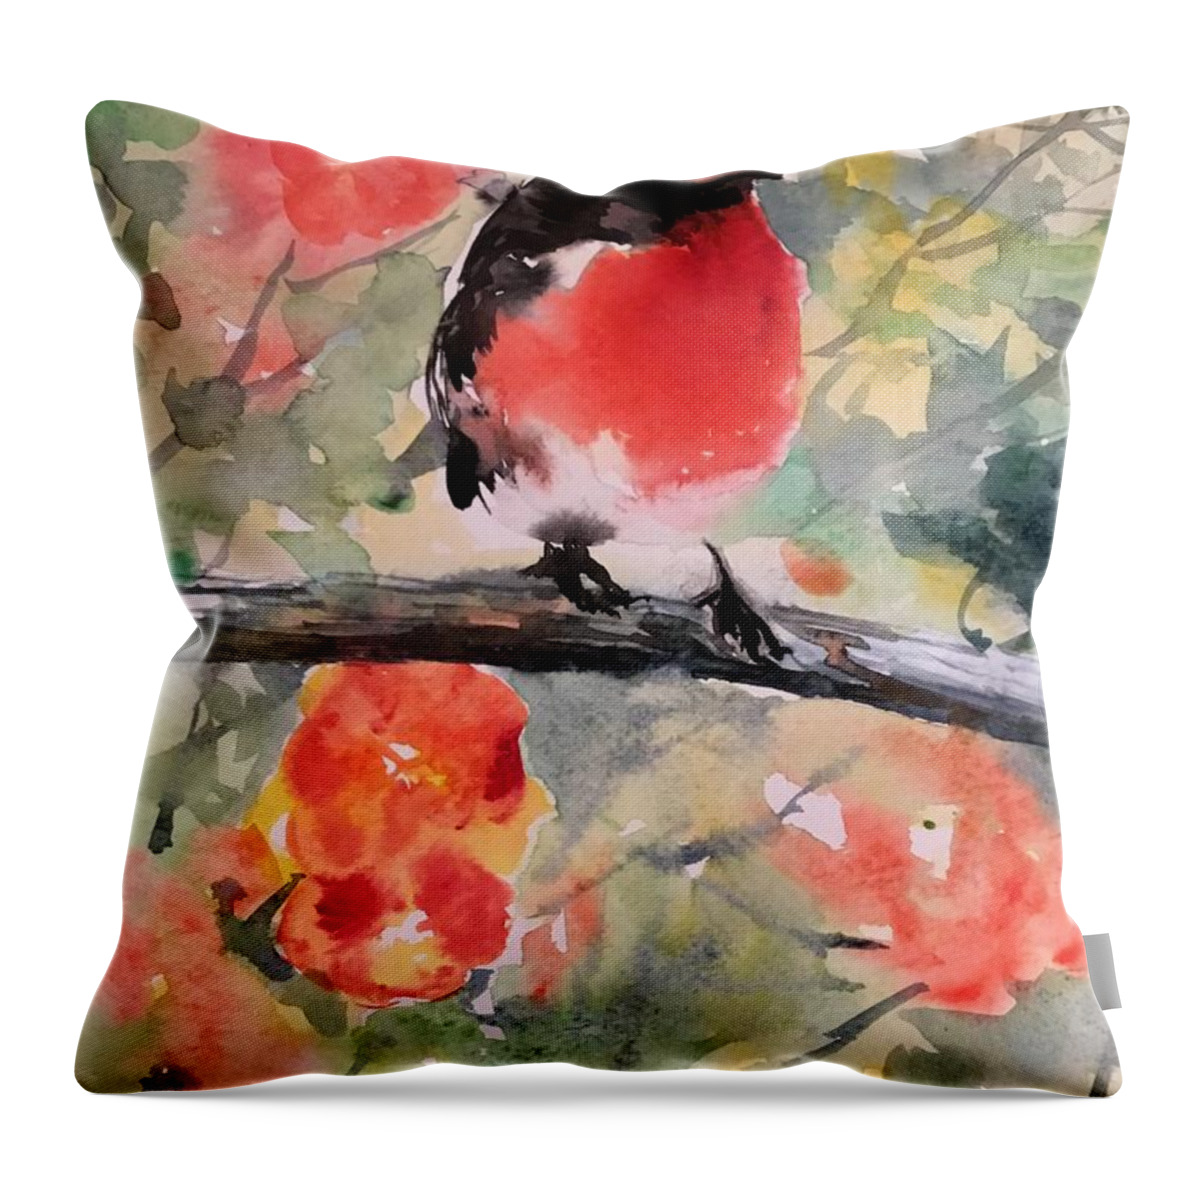 1312019 Throw Pillow featuring the painting 1312019 by Han in Huang wong